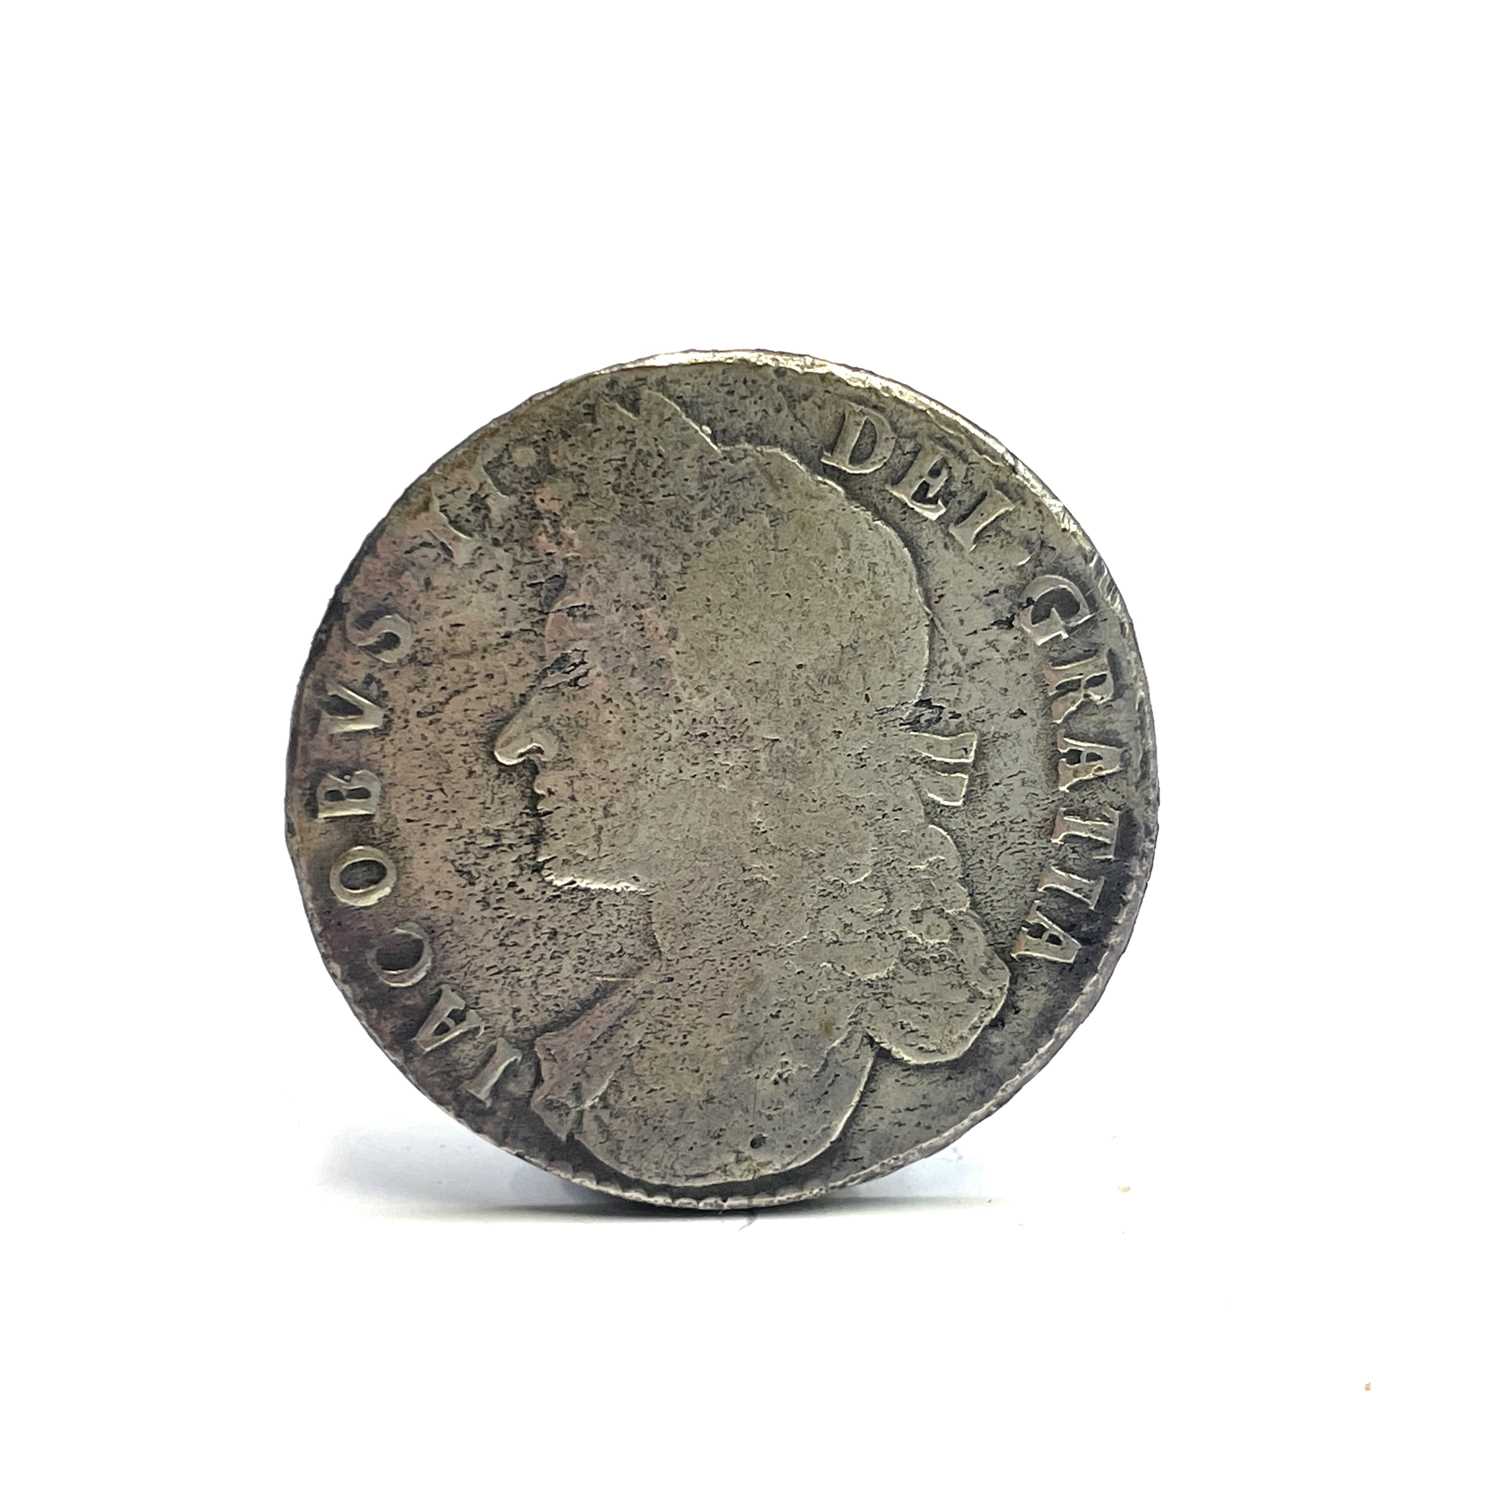 Great Britain 1688 James II Silver Halfcrown. The halfcrown is reputedly a wreck coin from the